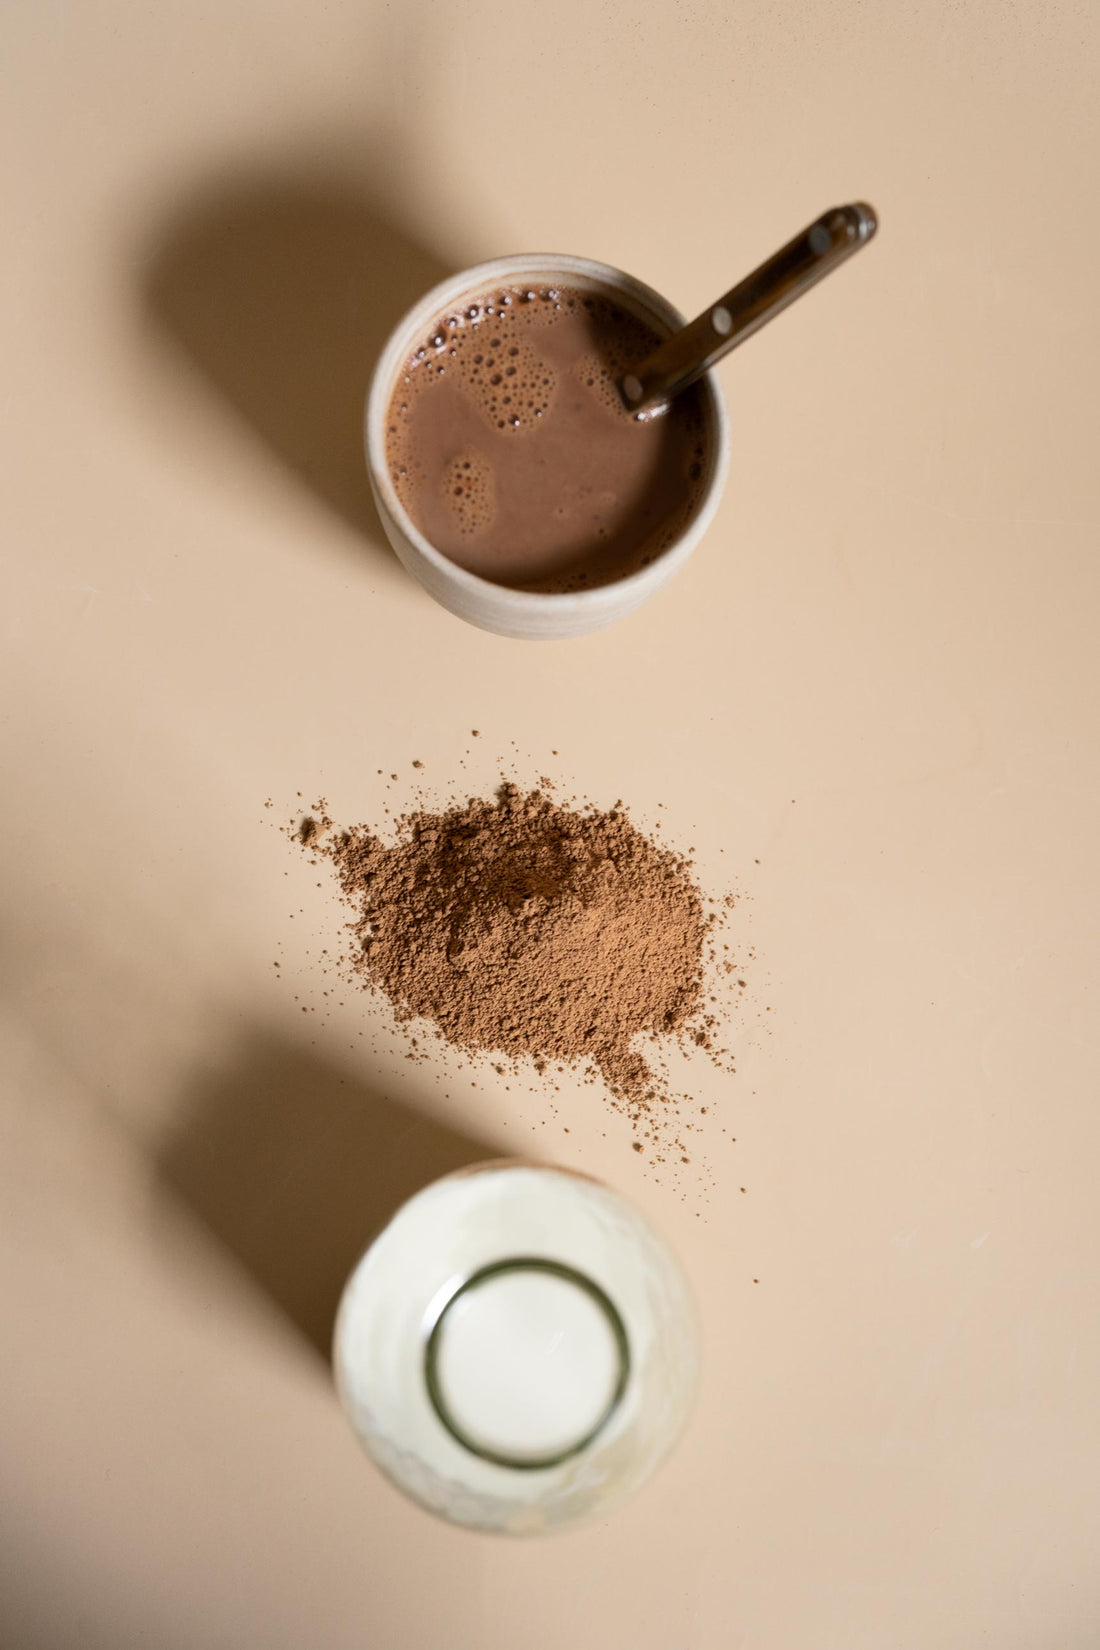 5 reasons to replace your coffee with hot chocolate